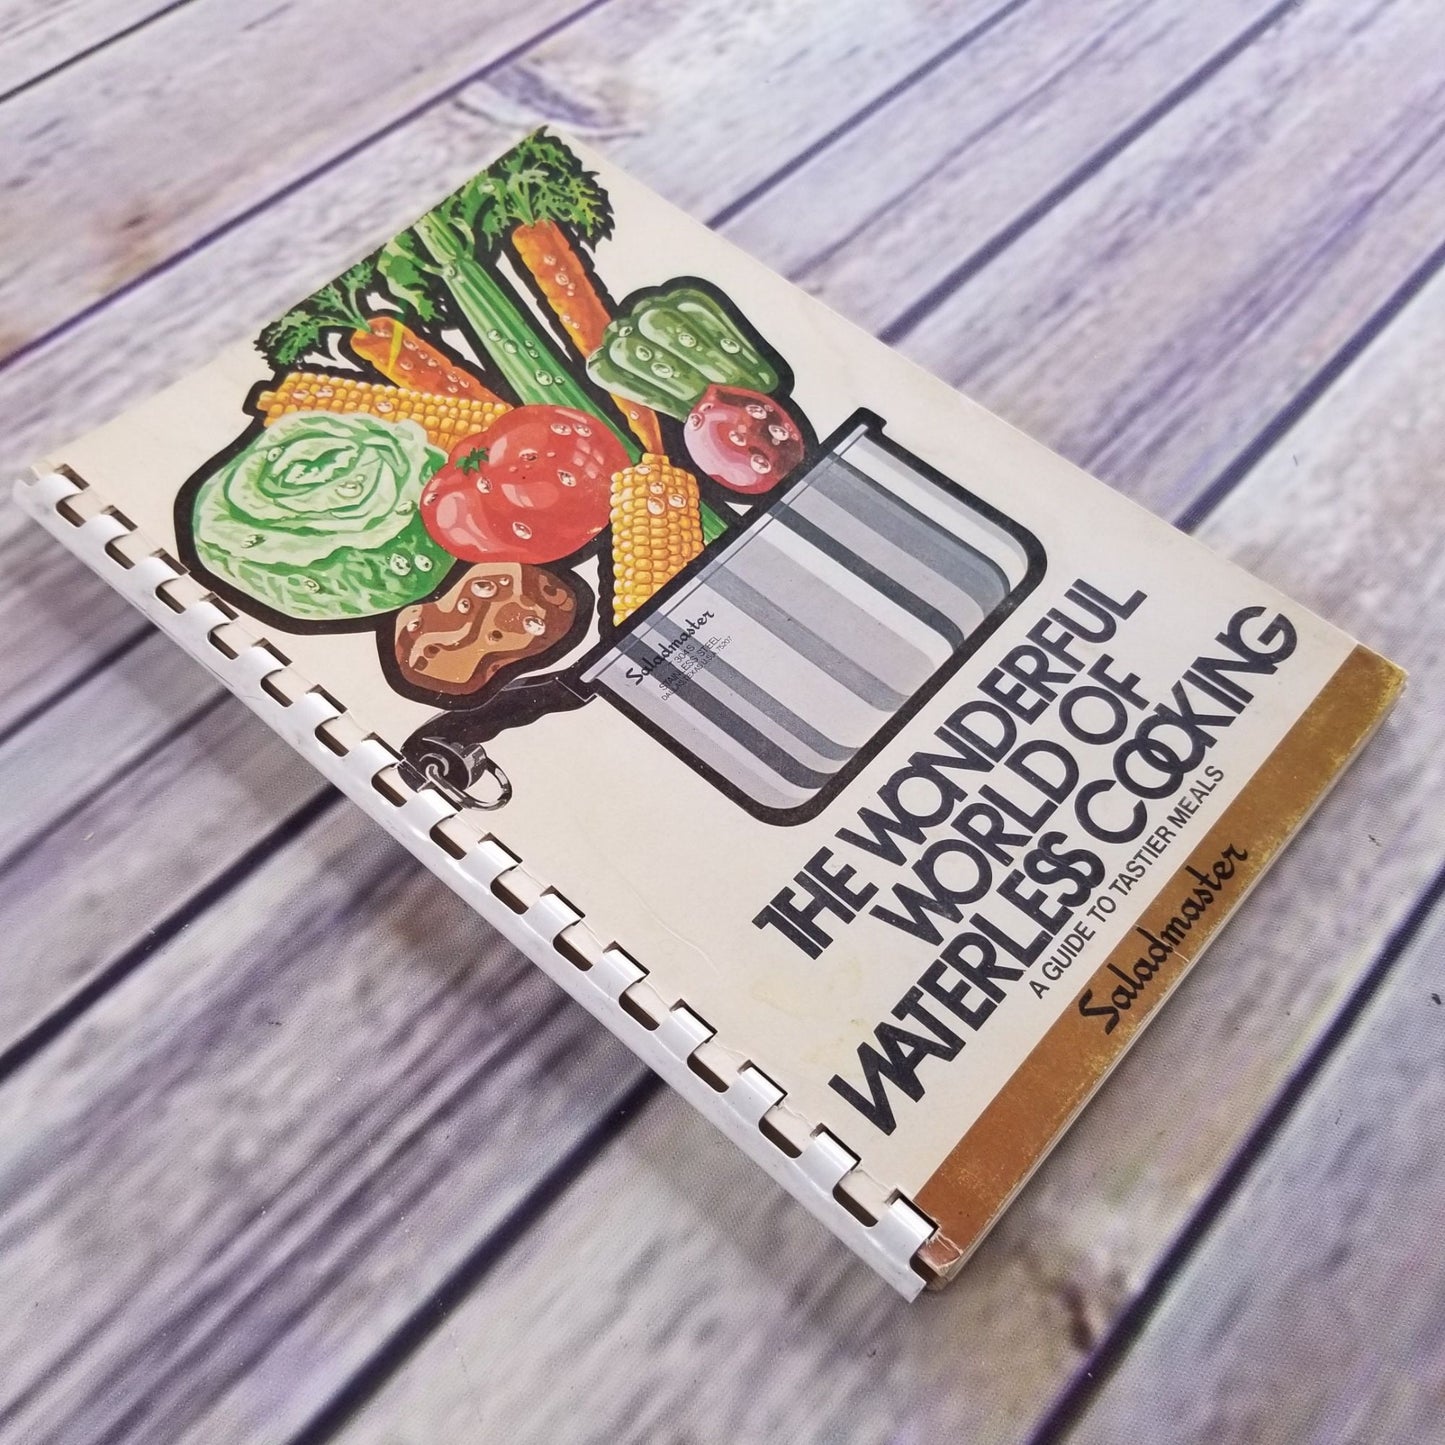 Vintage Saladmaster Cookbook The Wonderful World of Waterless Cooking Cookware Recipes Manual Care Instructions Spiral Bound 1960s 1950s